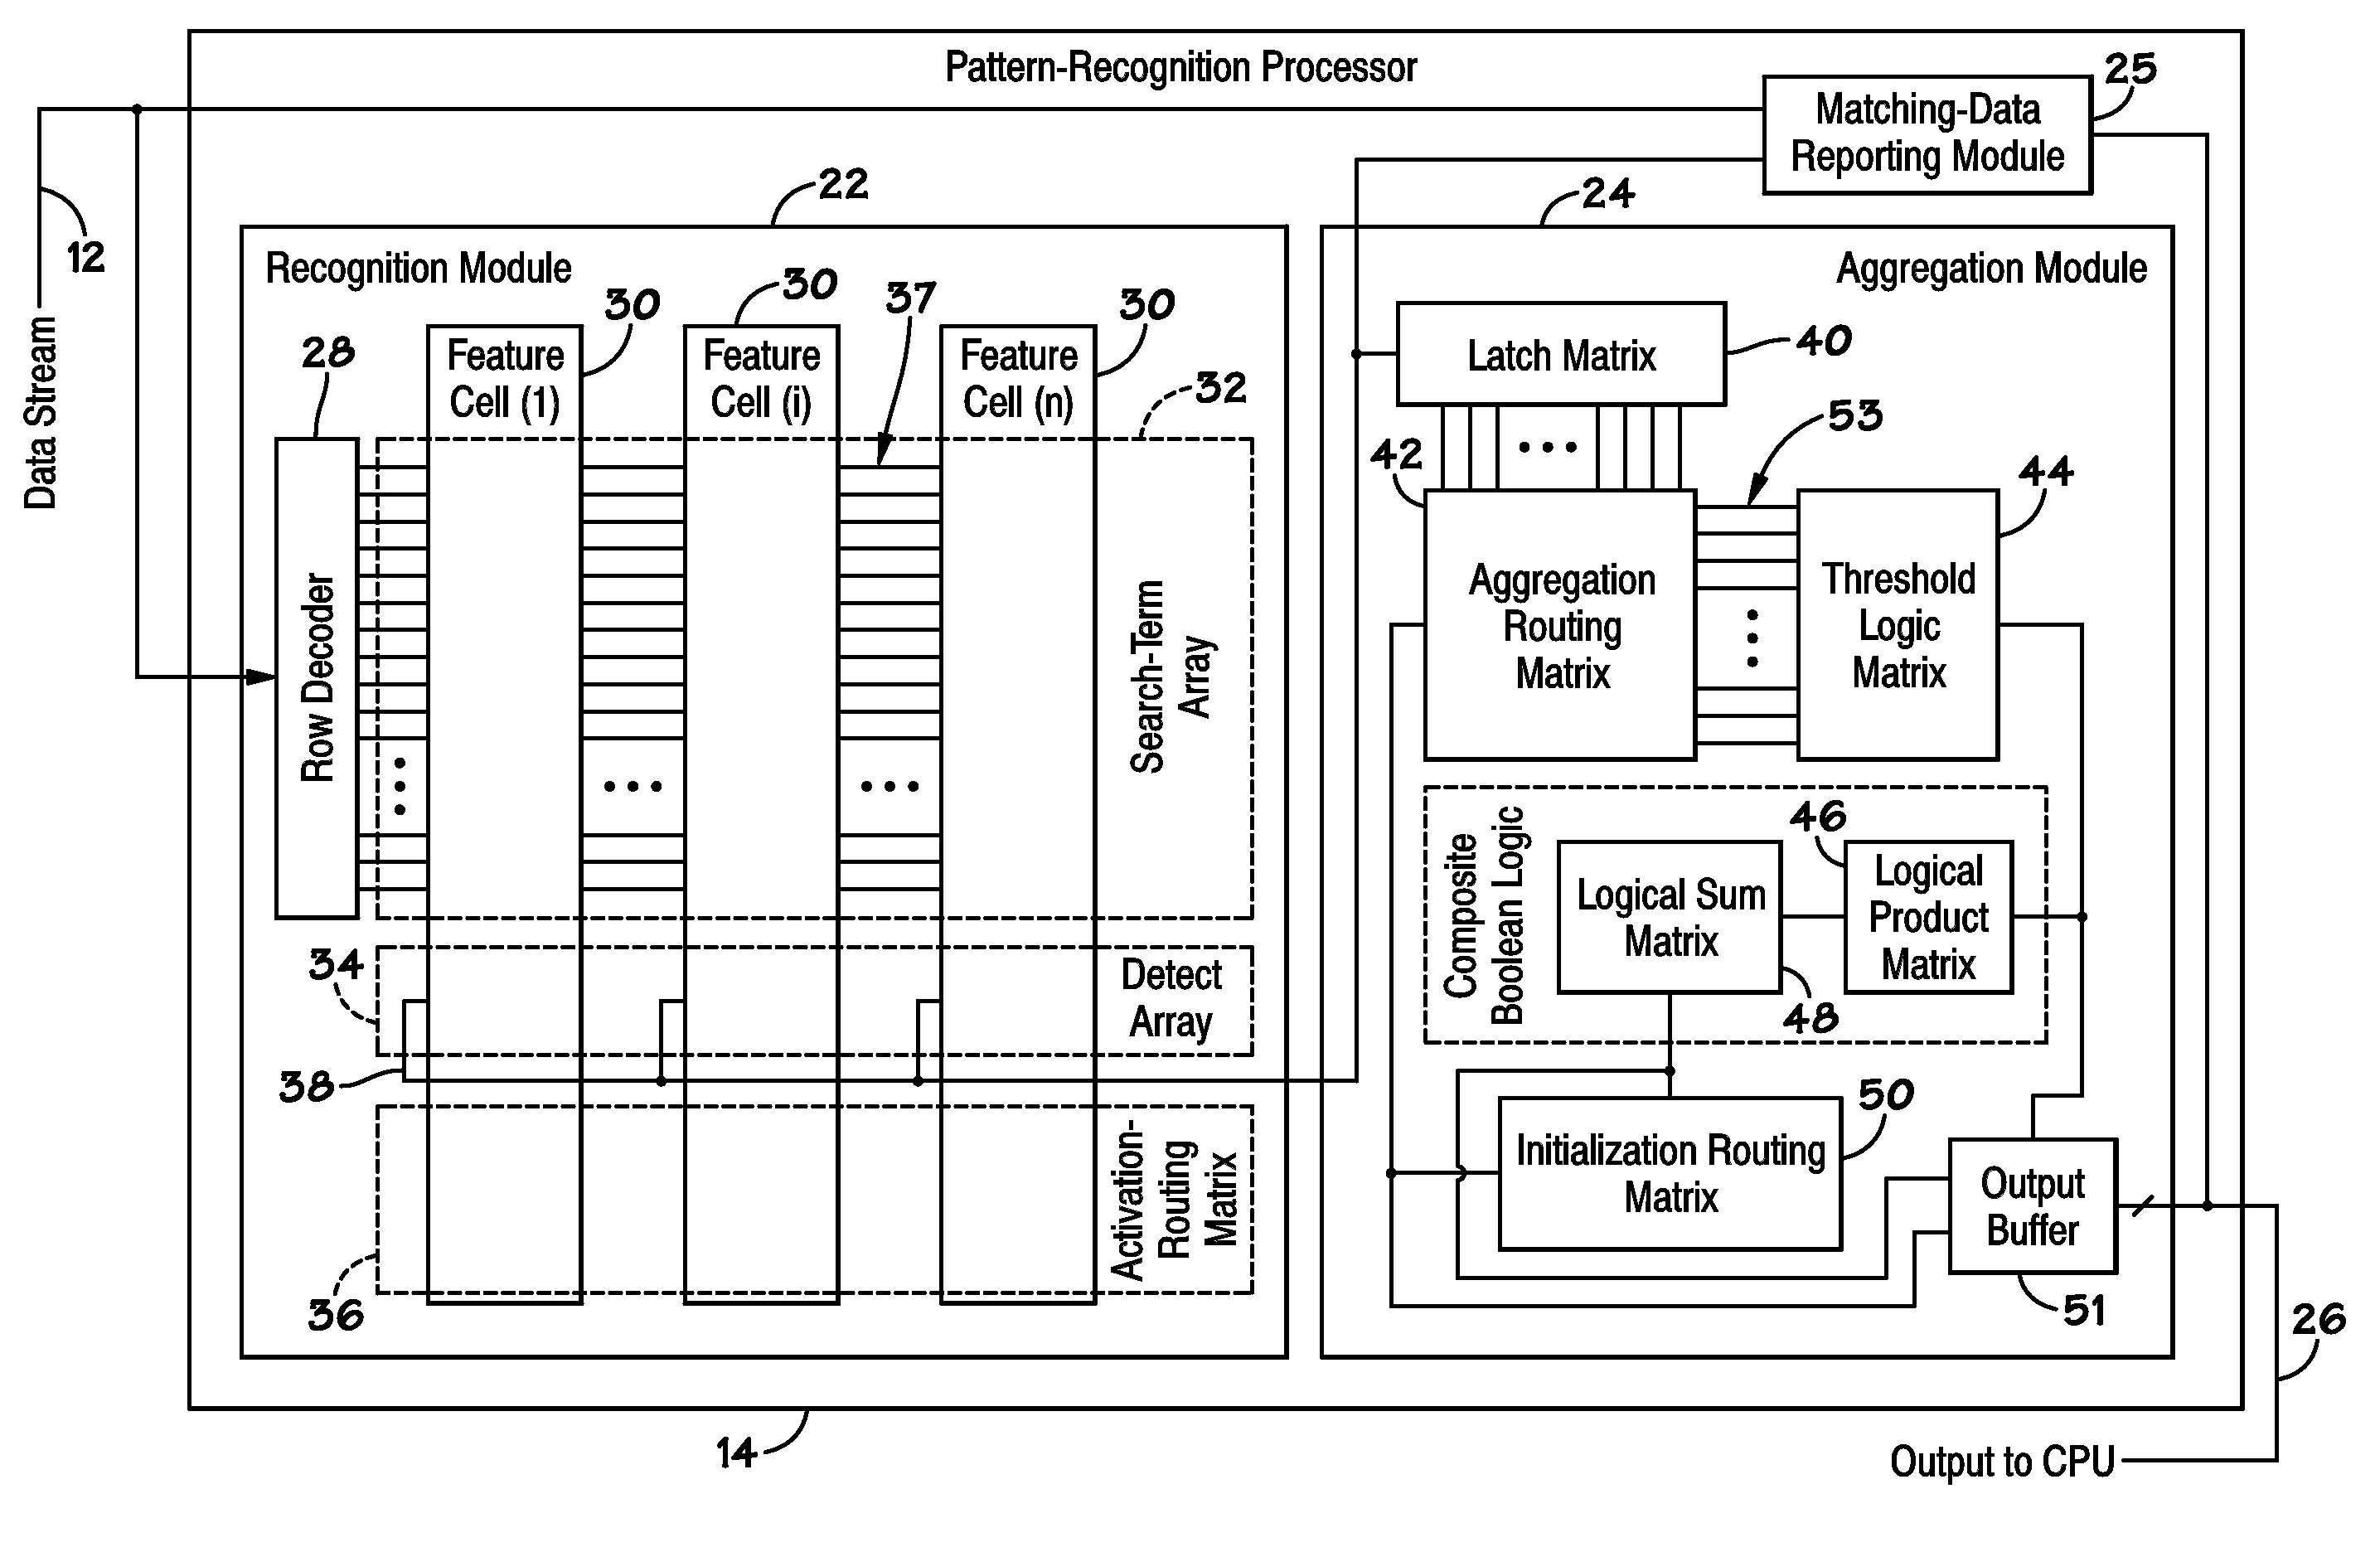 Pattern-recognition processor with matching-data reporting module